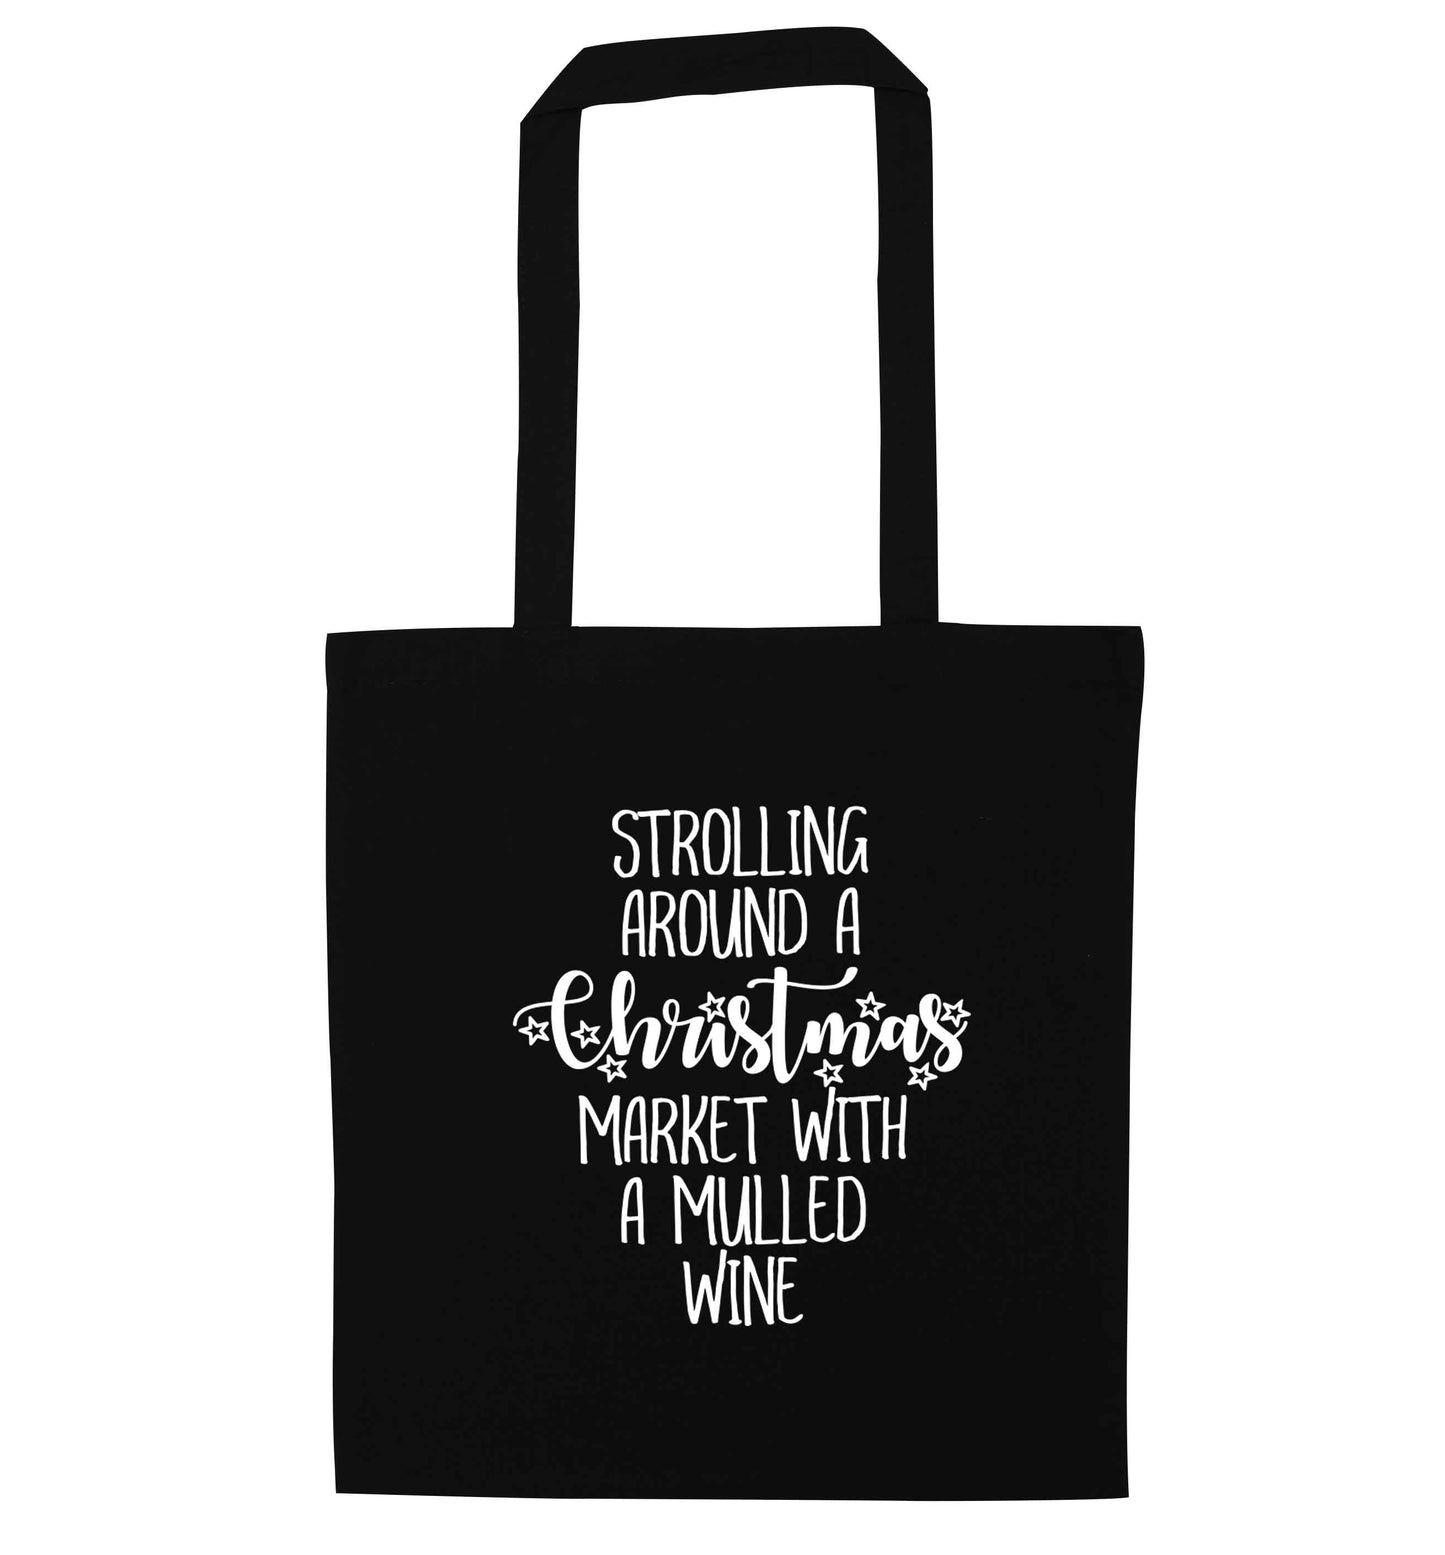 Strolling around a Christmas market with mulled wine black tote bag